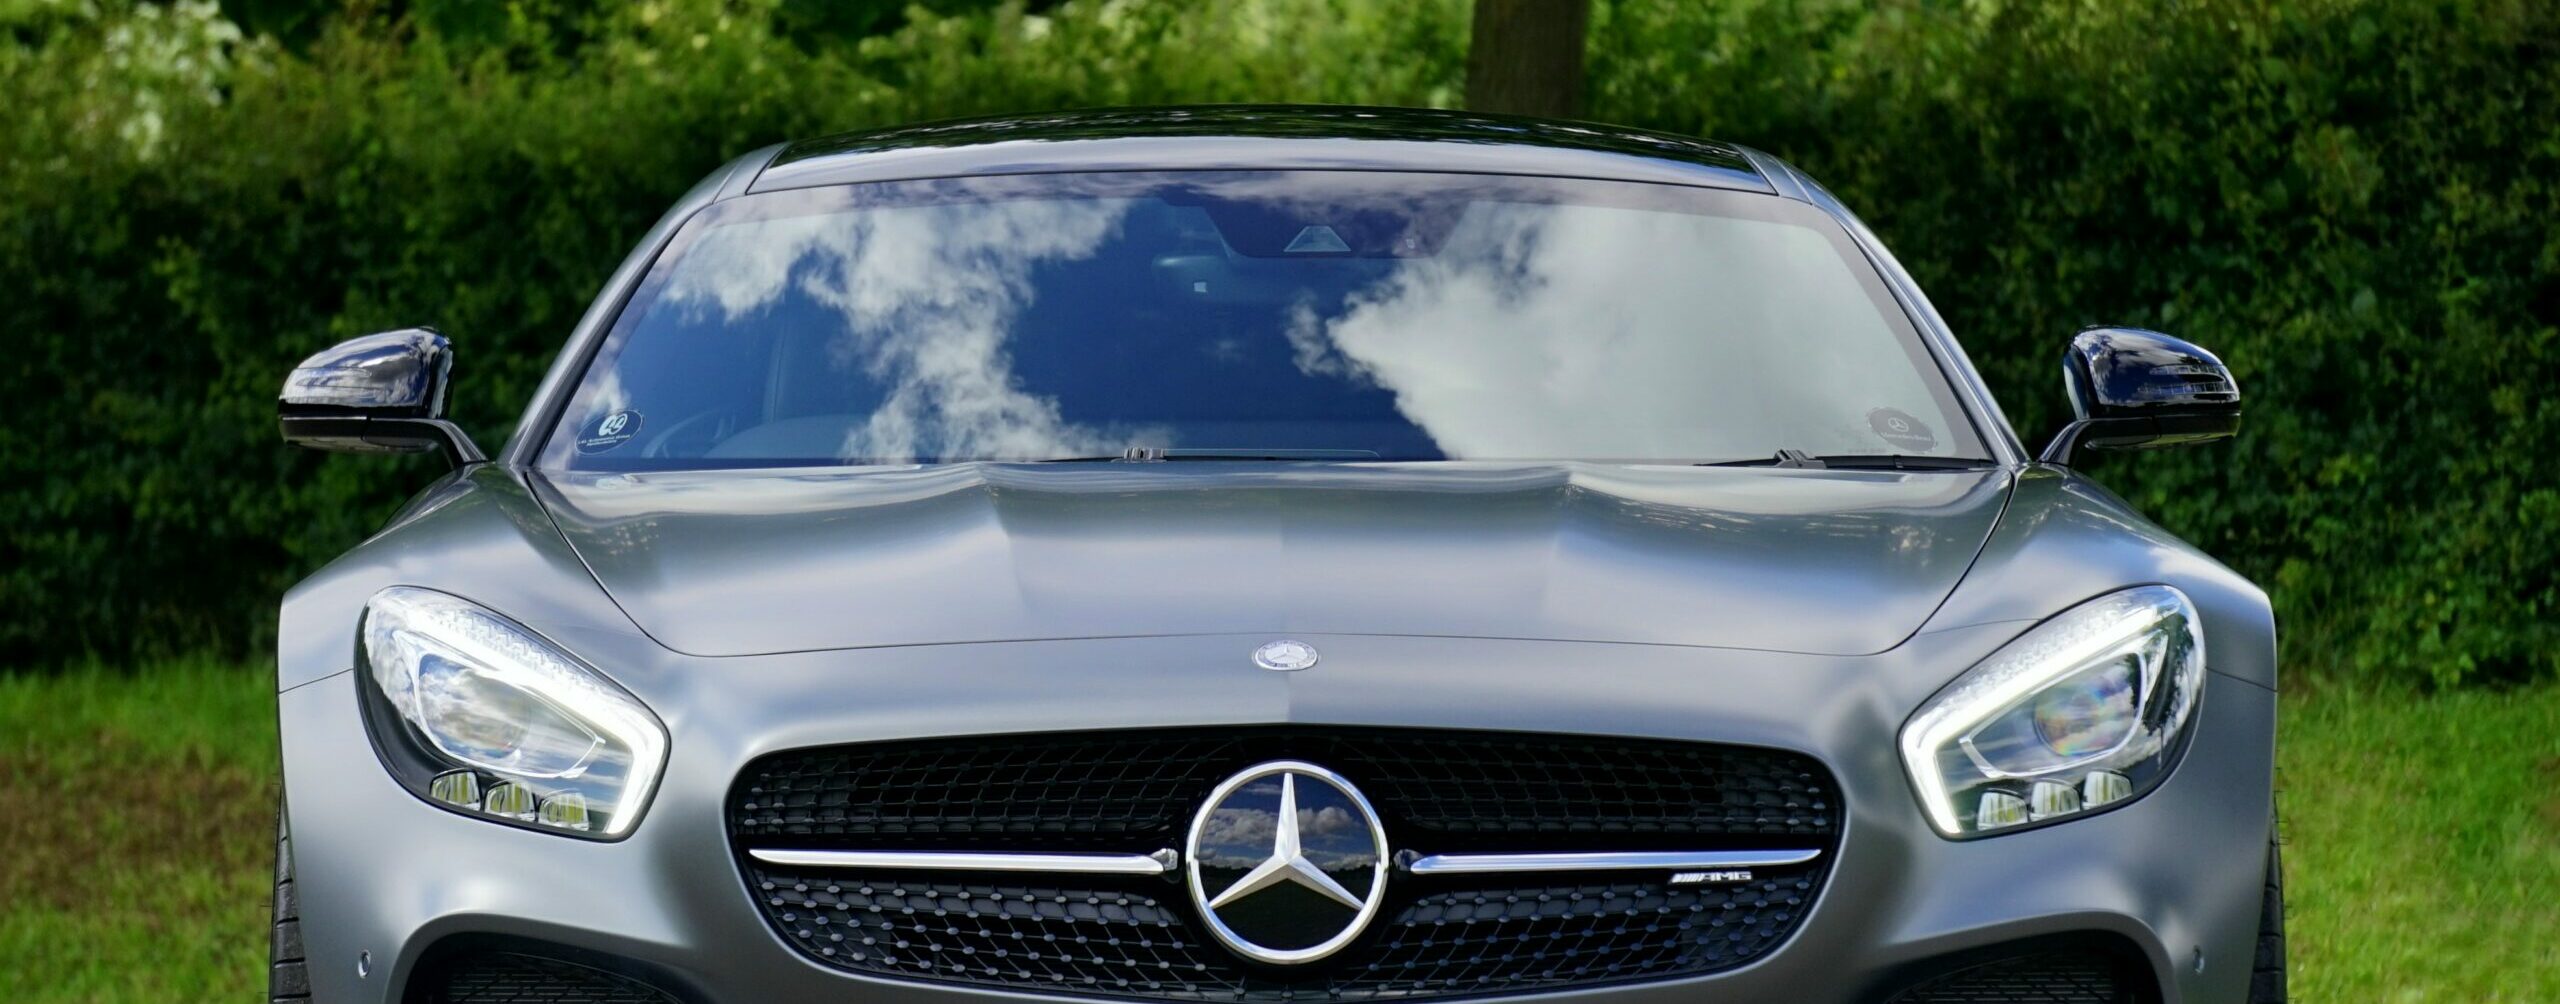 Front view of new Mercedes AMG, summer outside